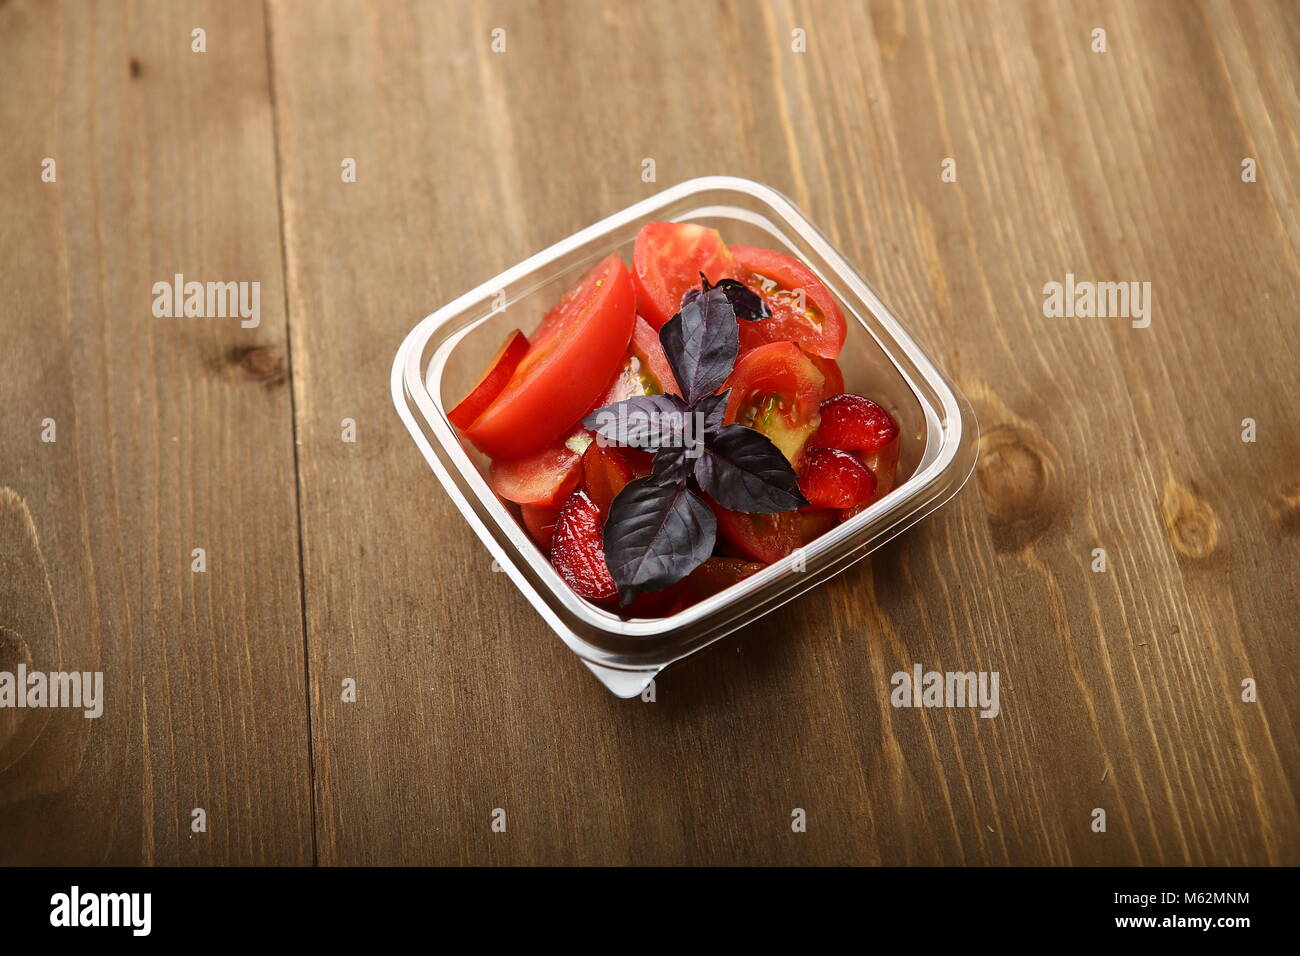 Salad from tomatoes and red plums with basil for a healthy diet. Delivery home, in a plastic transparent container. Low-calorie food to control body w Stock Photo